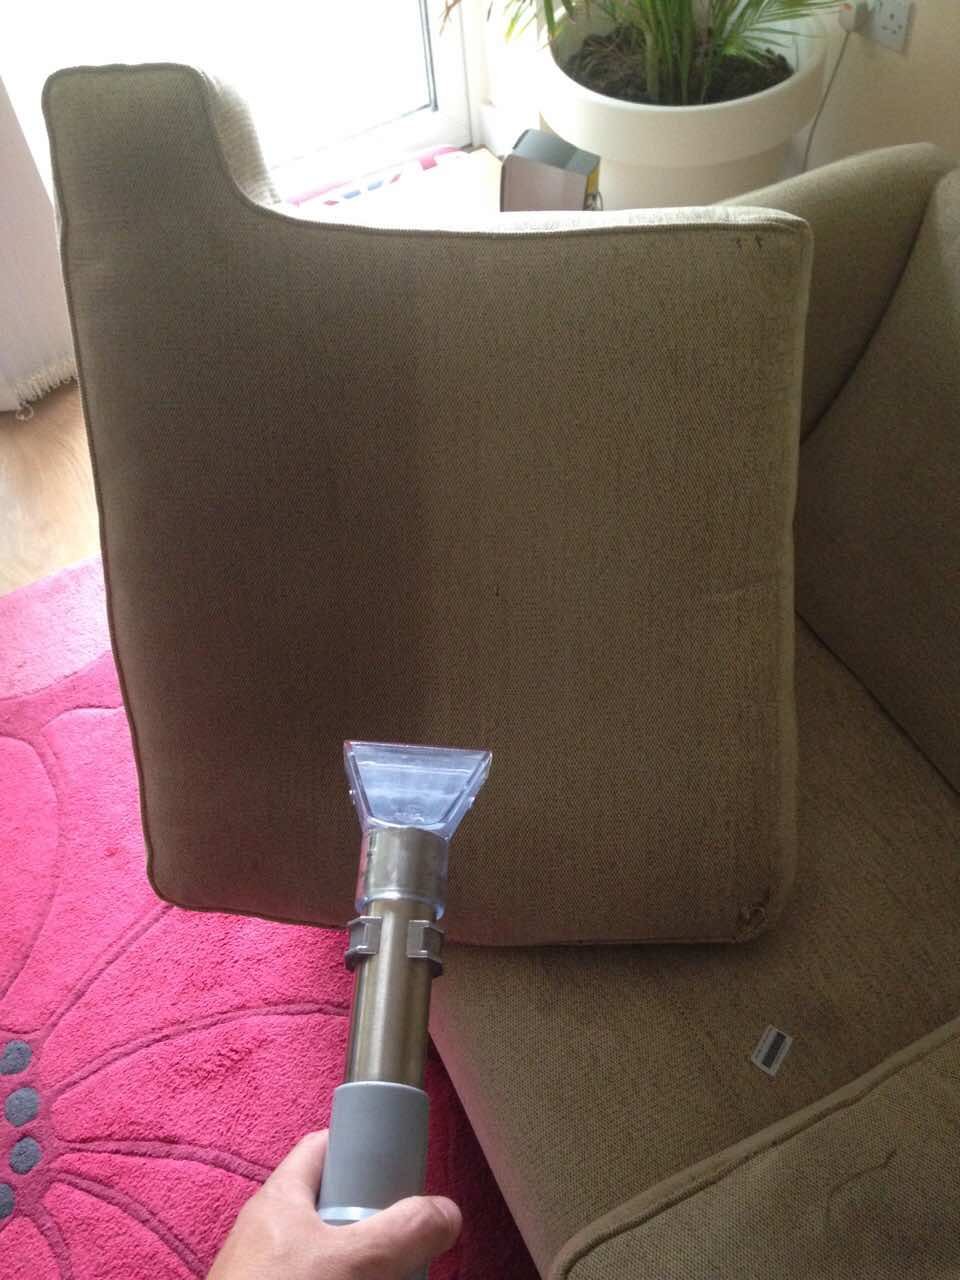 sofa+steam+cleaning+-+Go+For+Cleaning.jpg